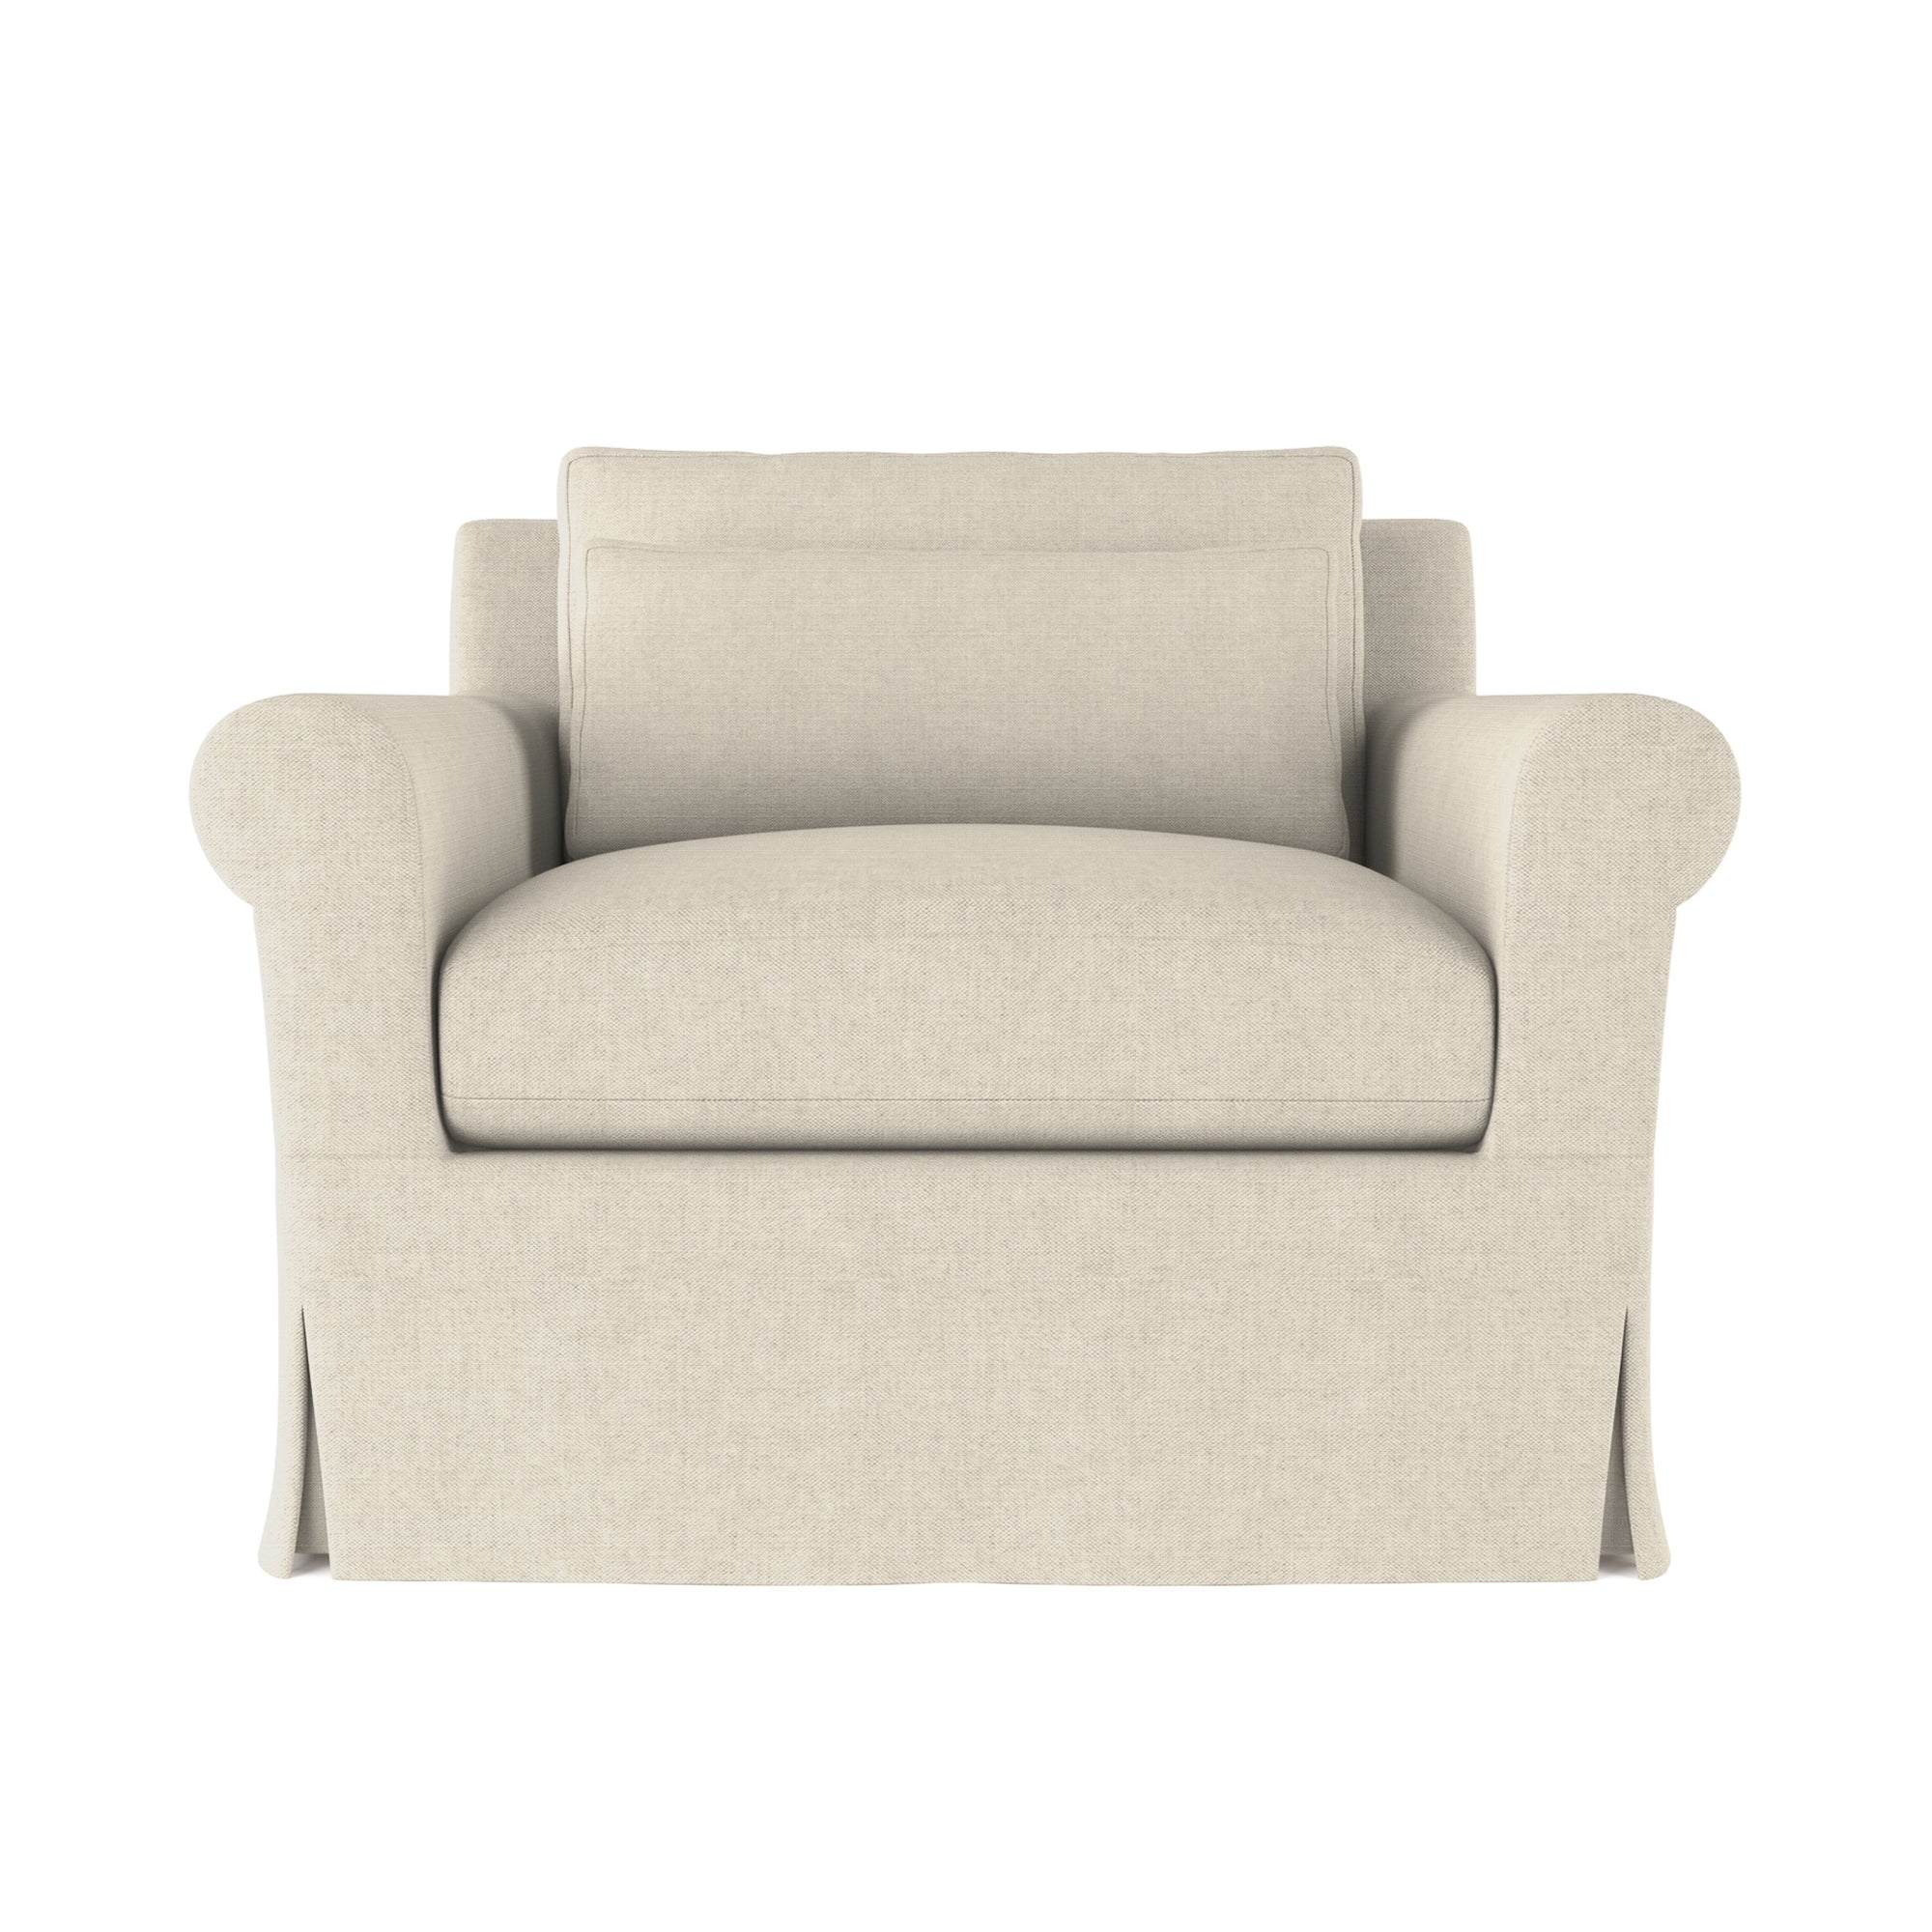 Ludlow Chair - Oyster Box Weave Linen